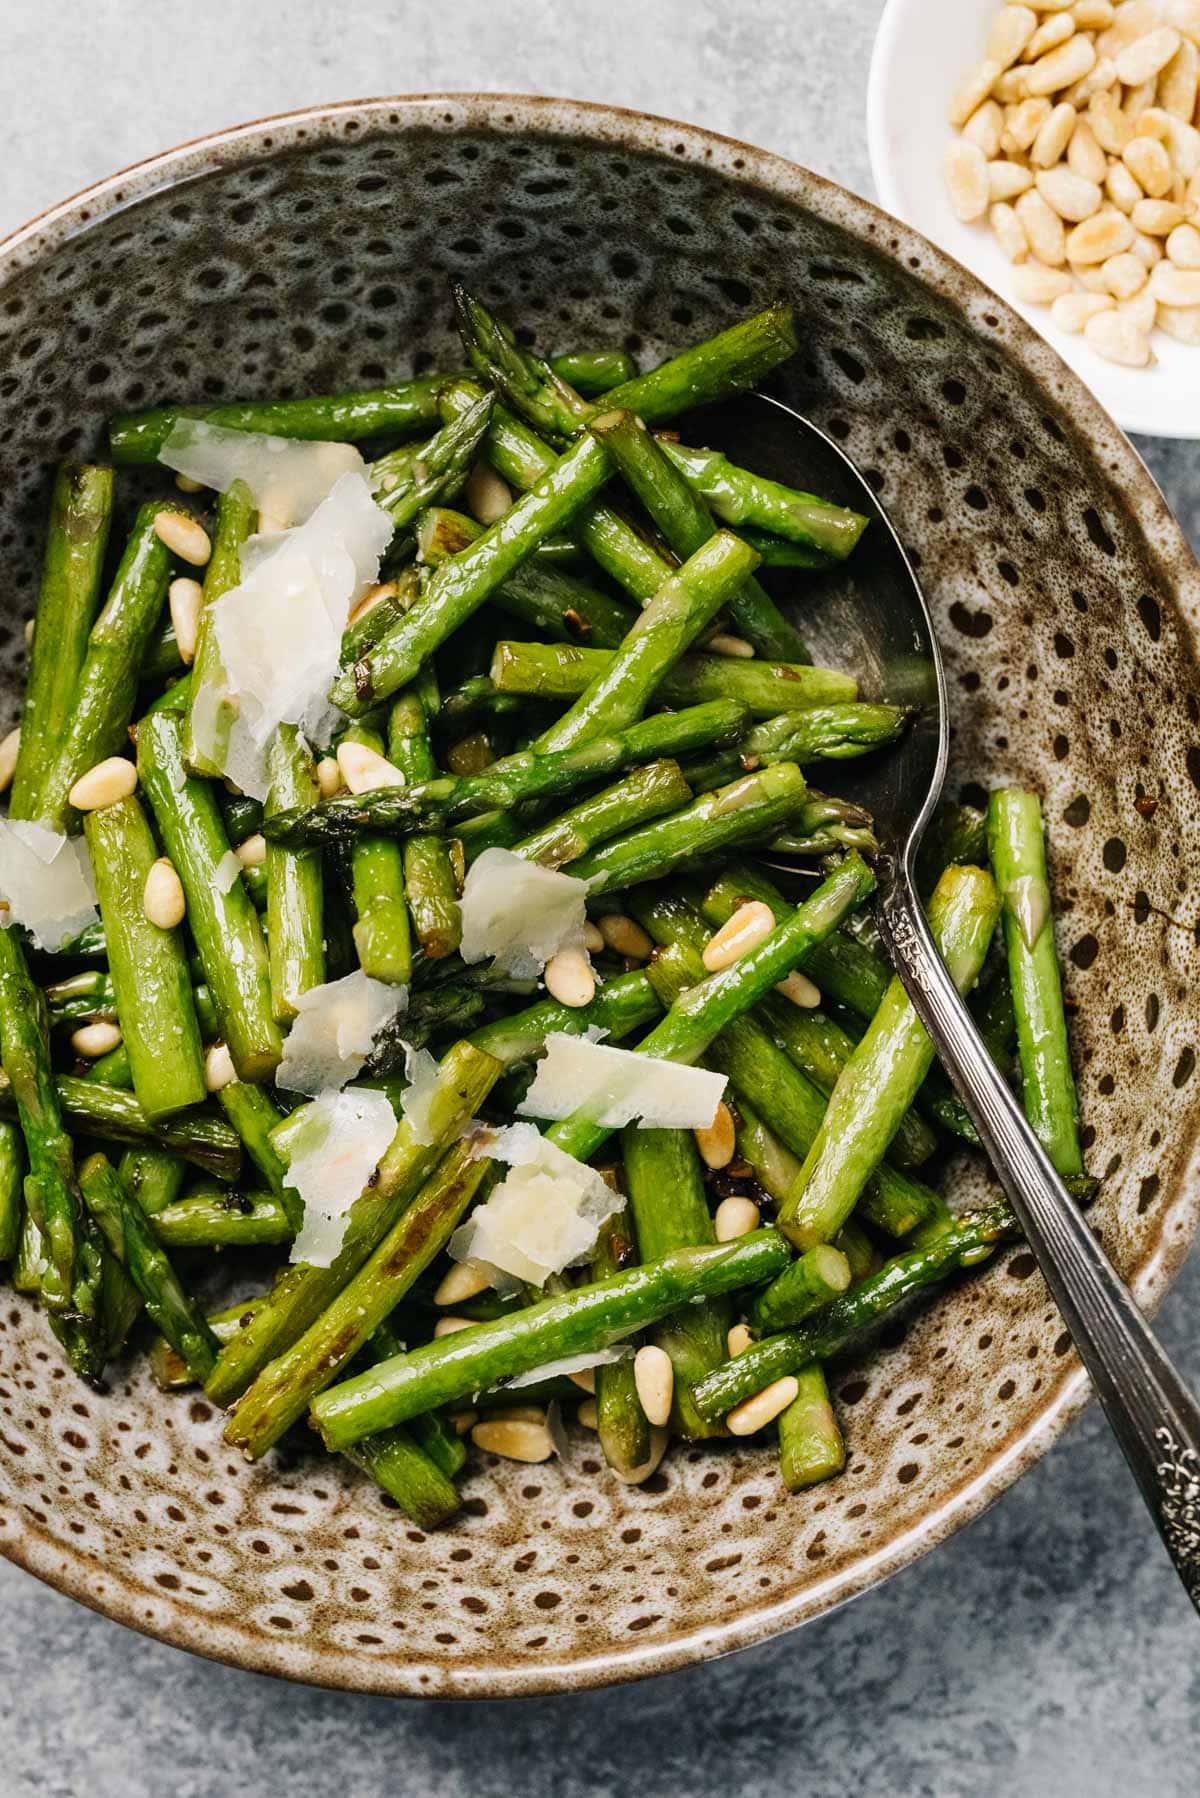 Sautéed asparagus in a brown speckled bowl with toasted pine nuts and shaved parmesan cheese.